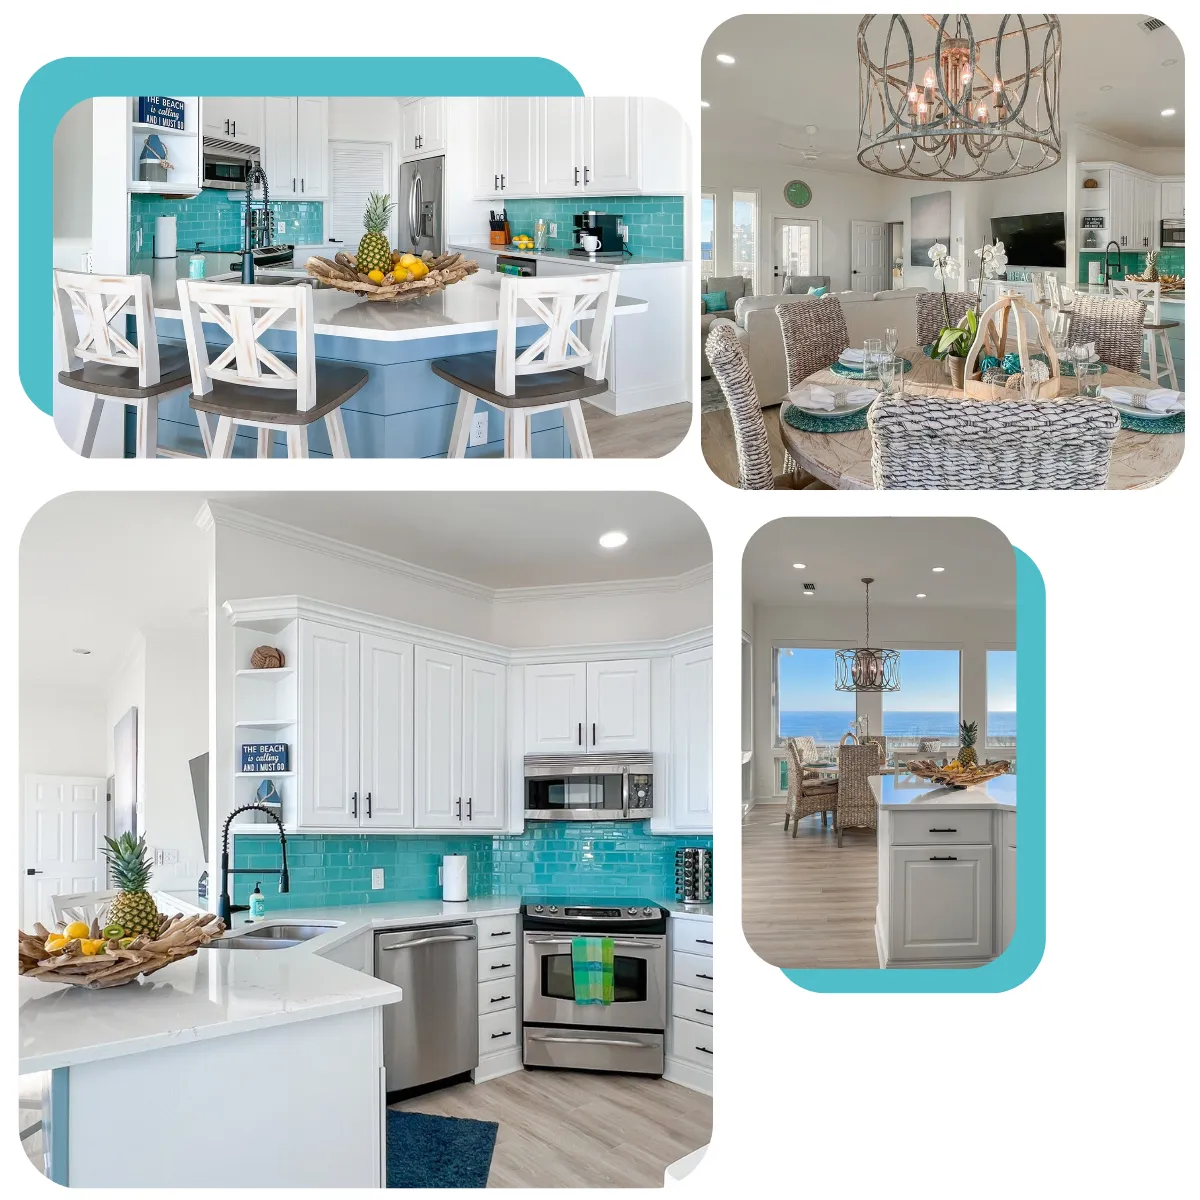 At Surfside Paradise, cook together in a fancy kitchen with great views. Dine outdoors, watch dolphins, and enjoy modern amenities. Plus, there's outdoor fun with a grill, picnic table, and soon, a hot tub.